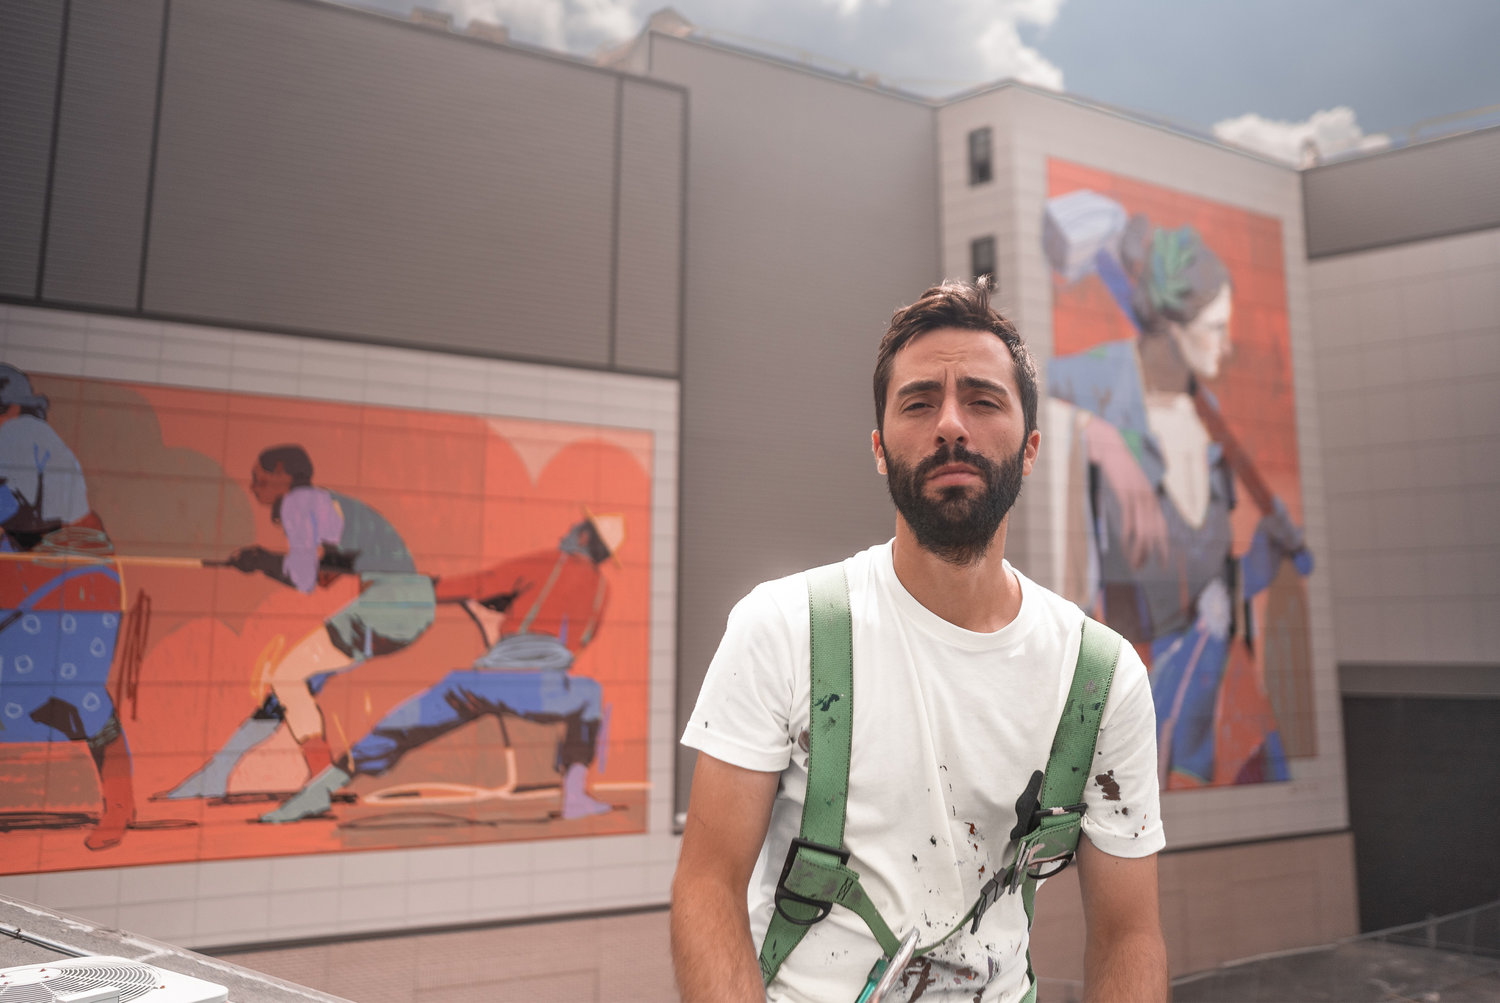 The Avenue Concept draws some of the most celebrated muralists in the world – like its most recent commission from renowned Spanish artist Octavi Arrizabalaga, also known as ARYZ – to use the city’s buildings as giant canvases